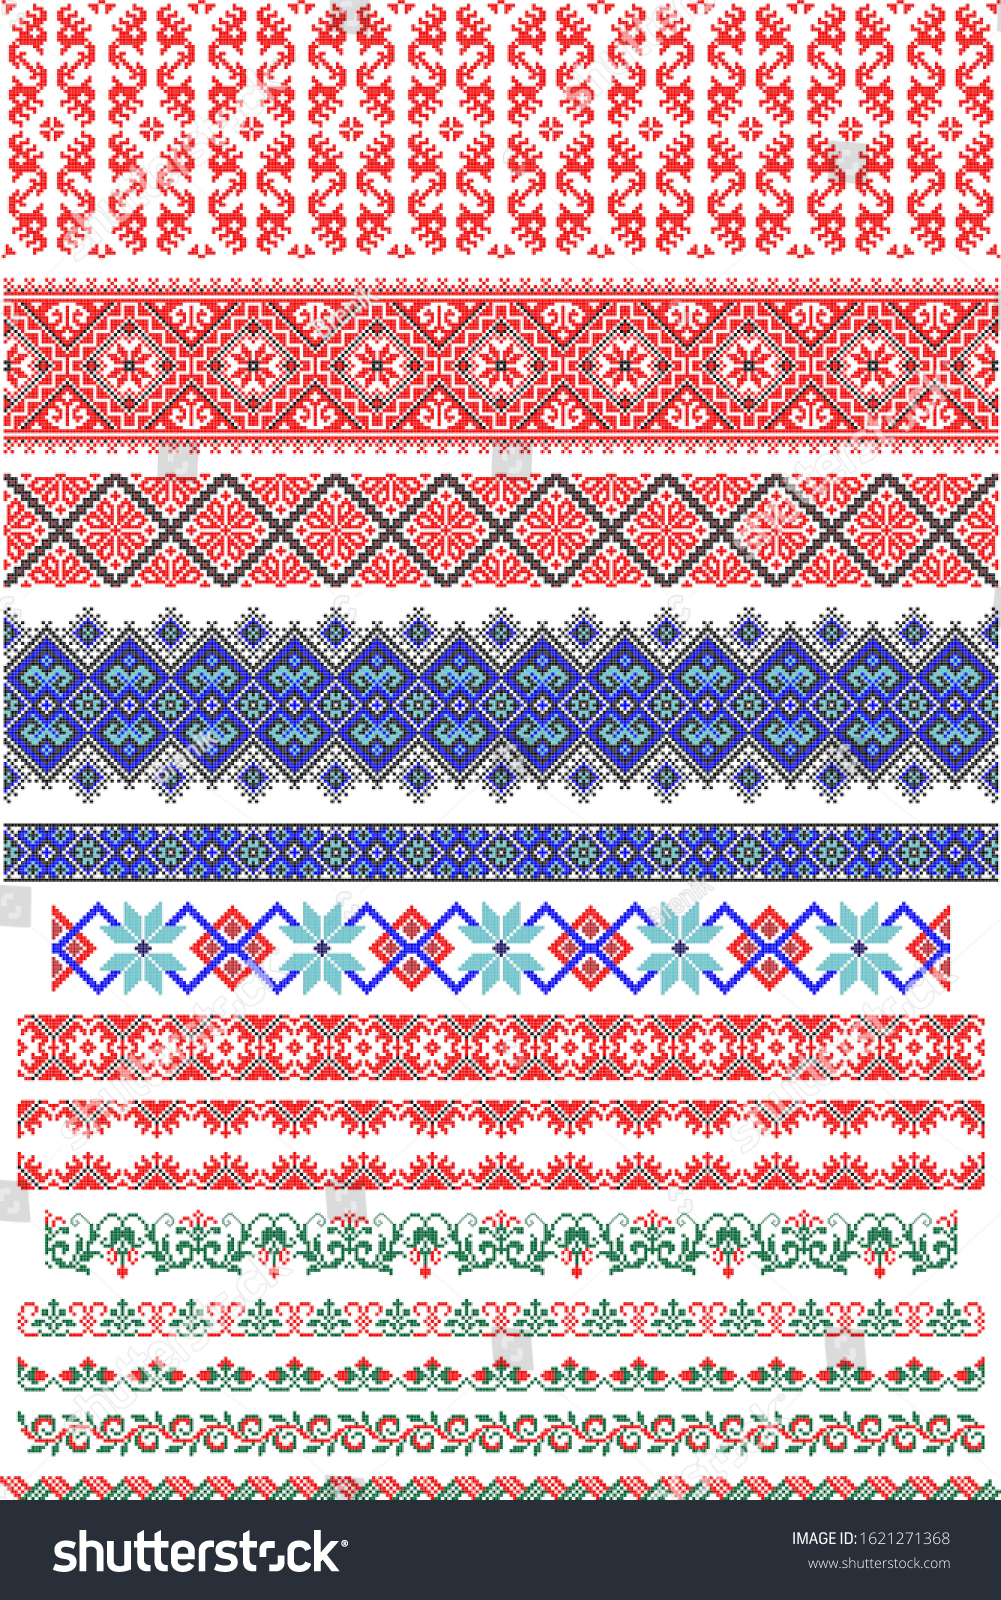 SVG of Element traditional Romanian folk art knitted embroidery pattern svg